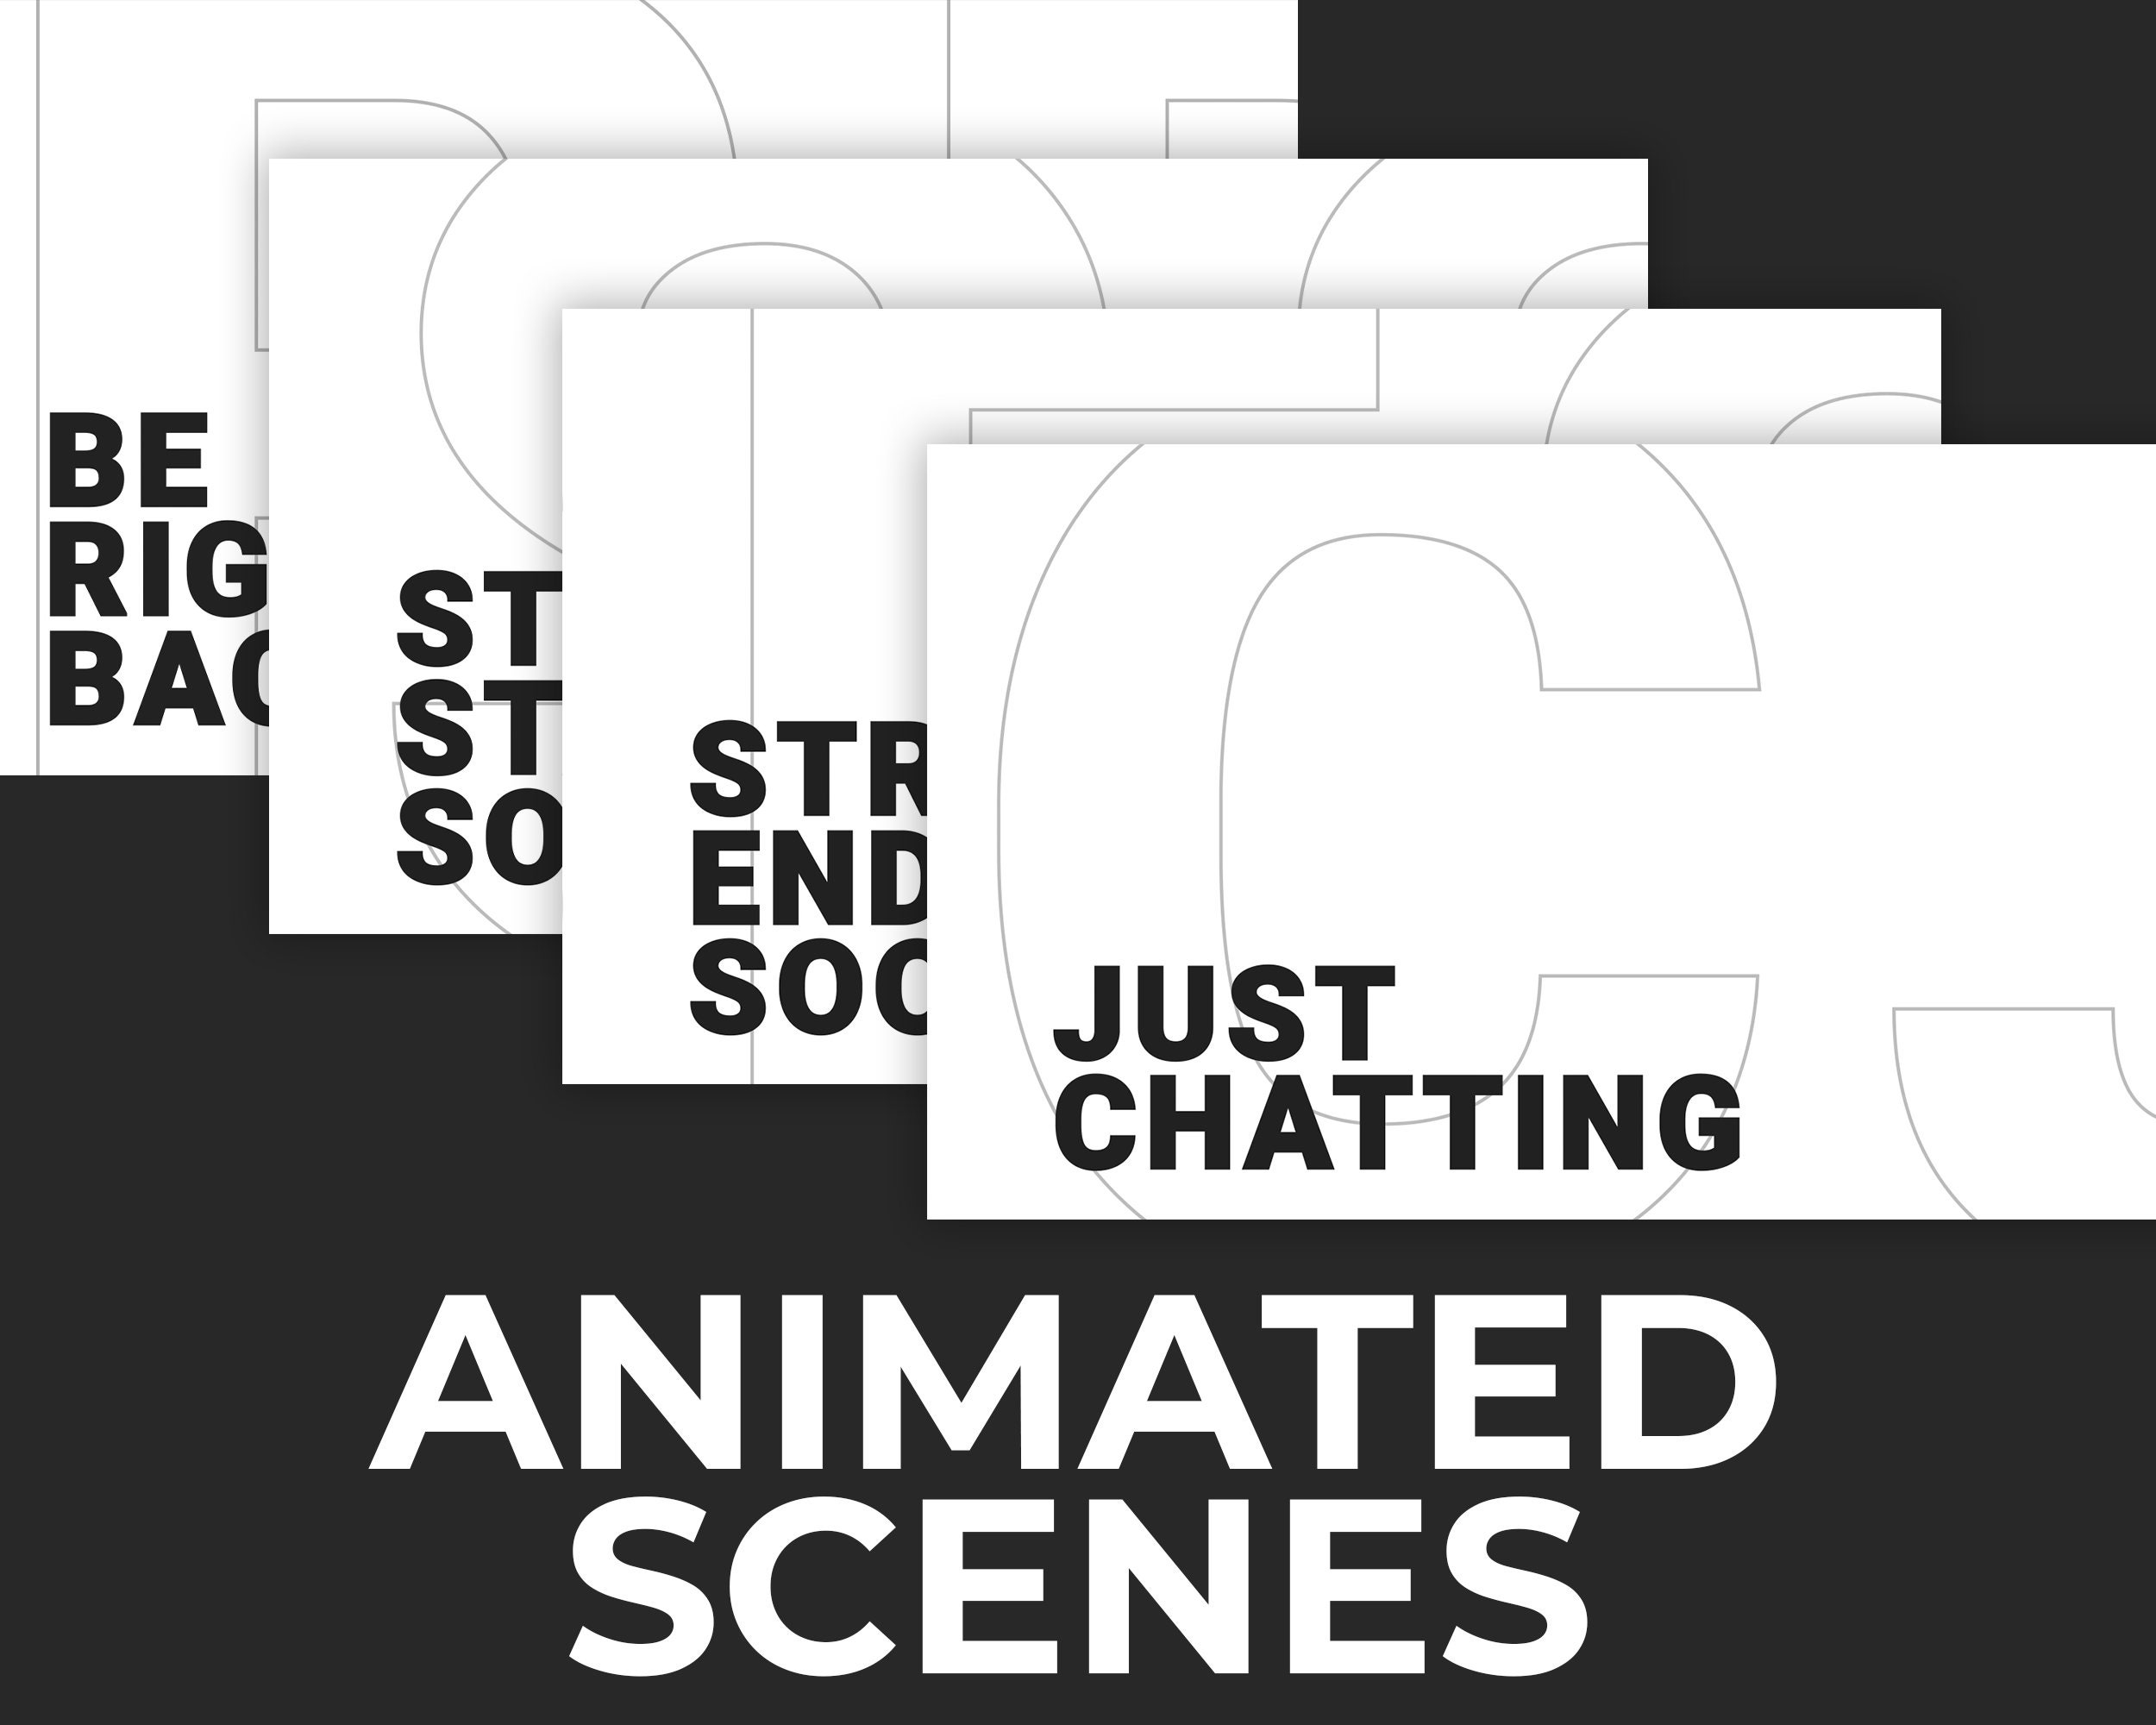 Intermission screen overlays (Just Chatting)